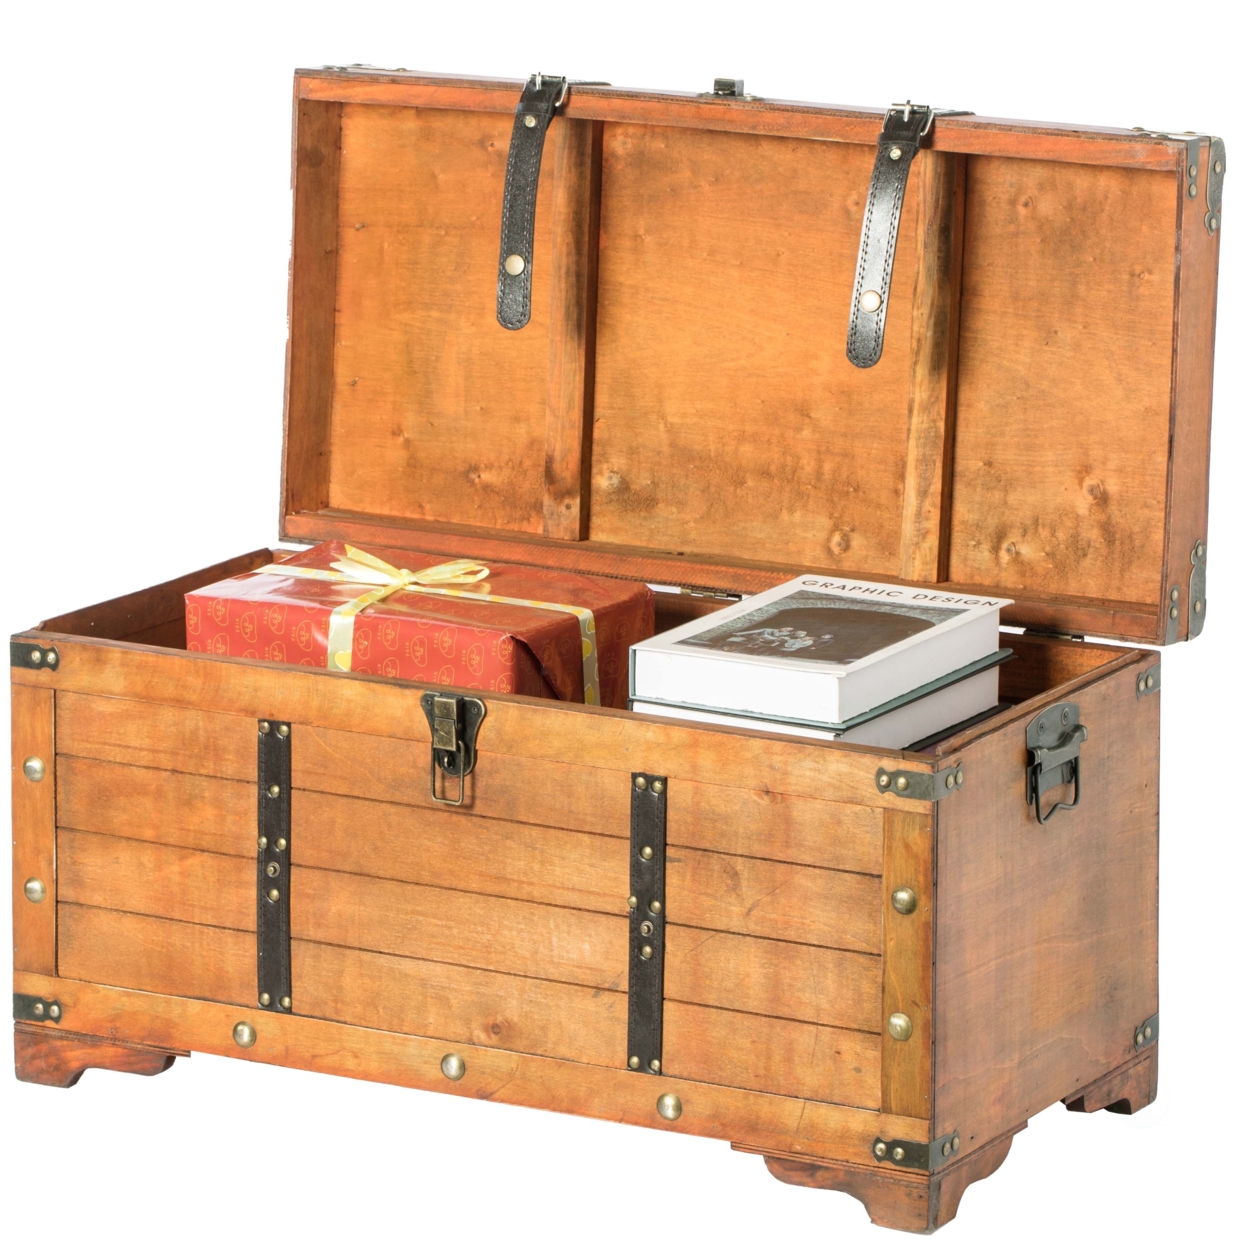 Rustic Large Wooden Storage Trunk With Lockable Latch